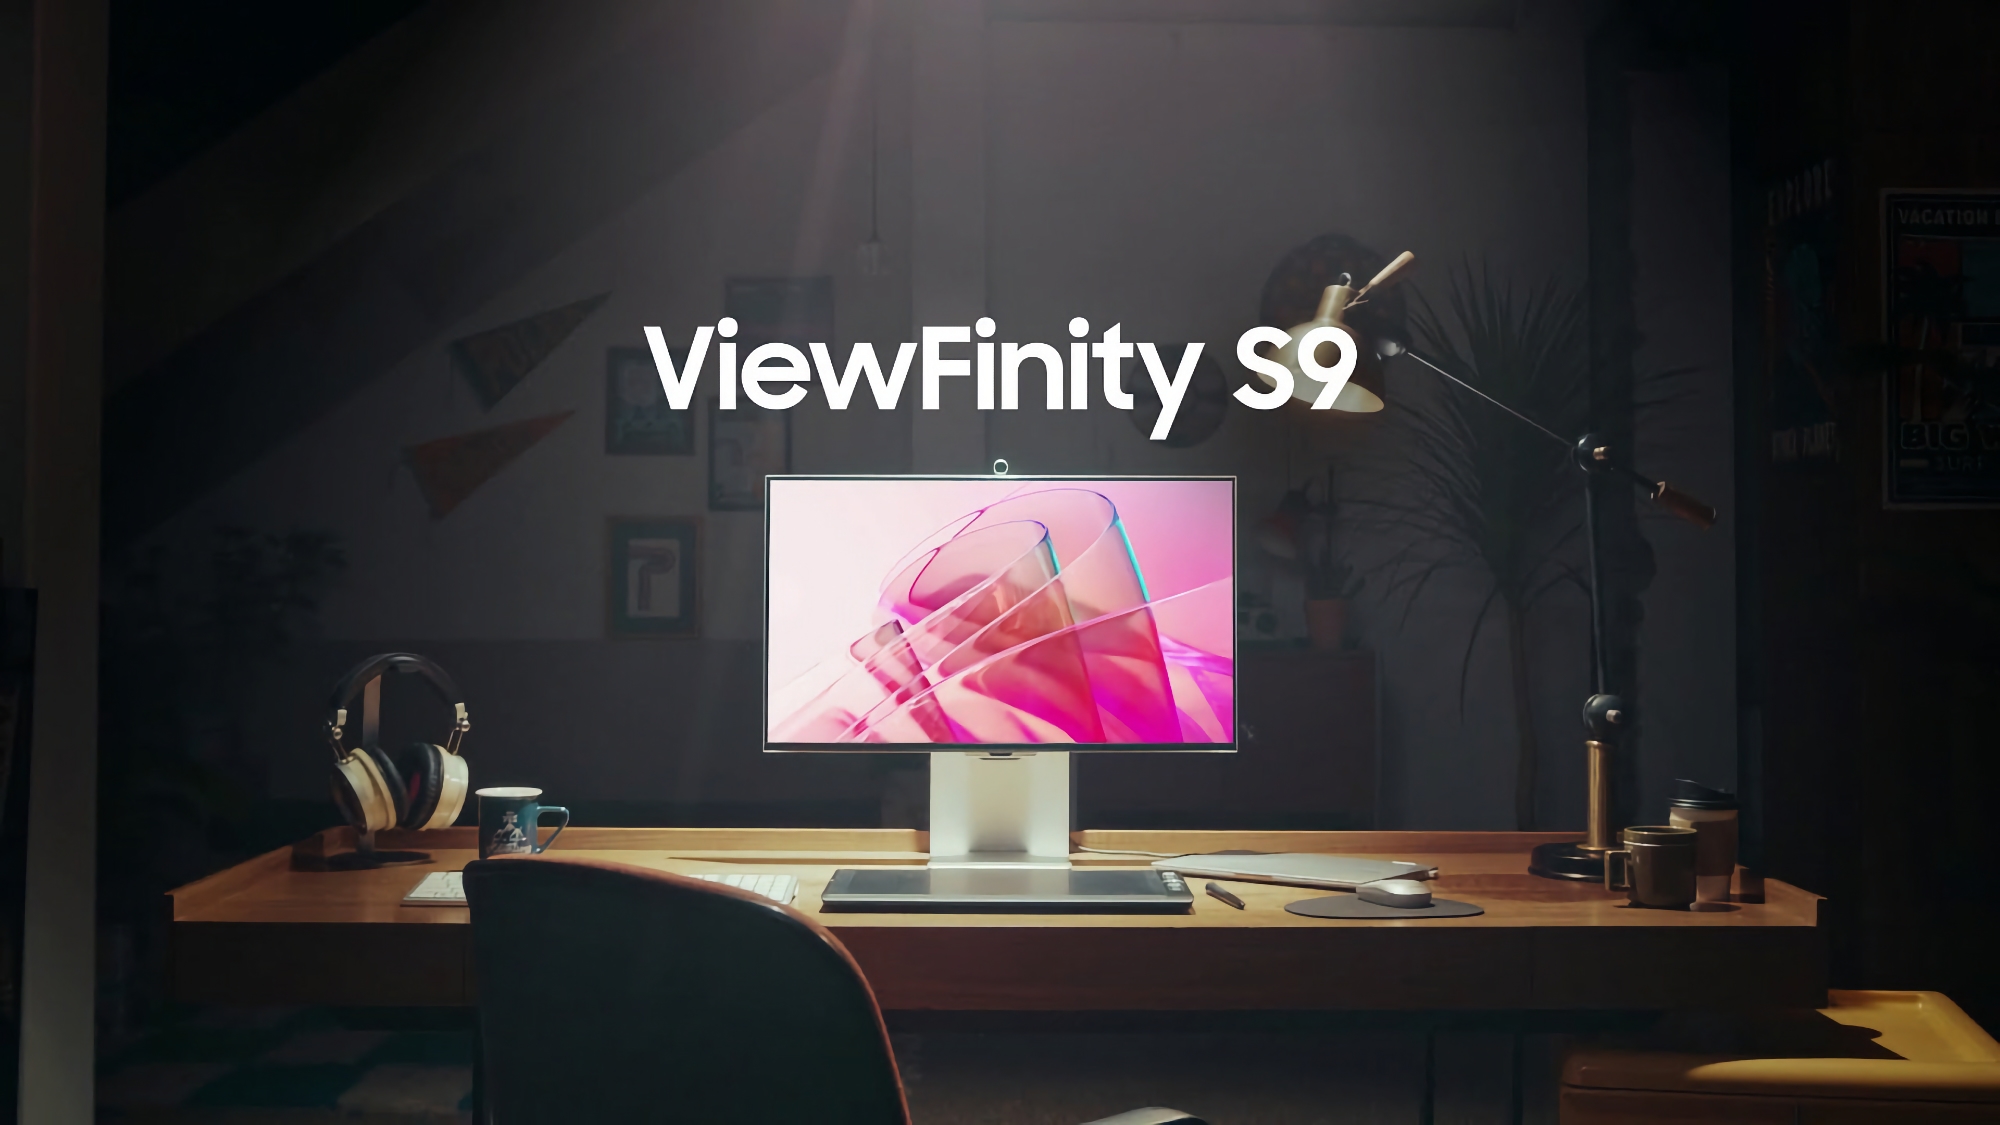 Offer of the day: the Samsung ViewFinity S9 with 5K screen can be bought on Amazon at a discounted price of $600